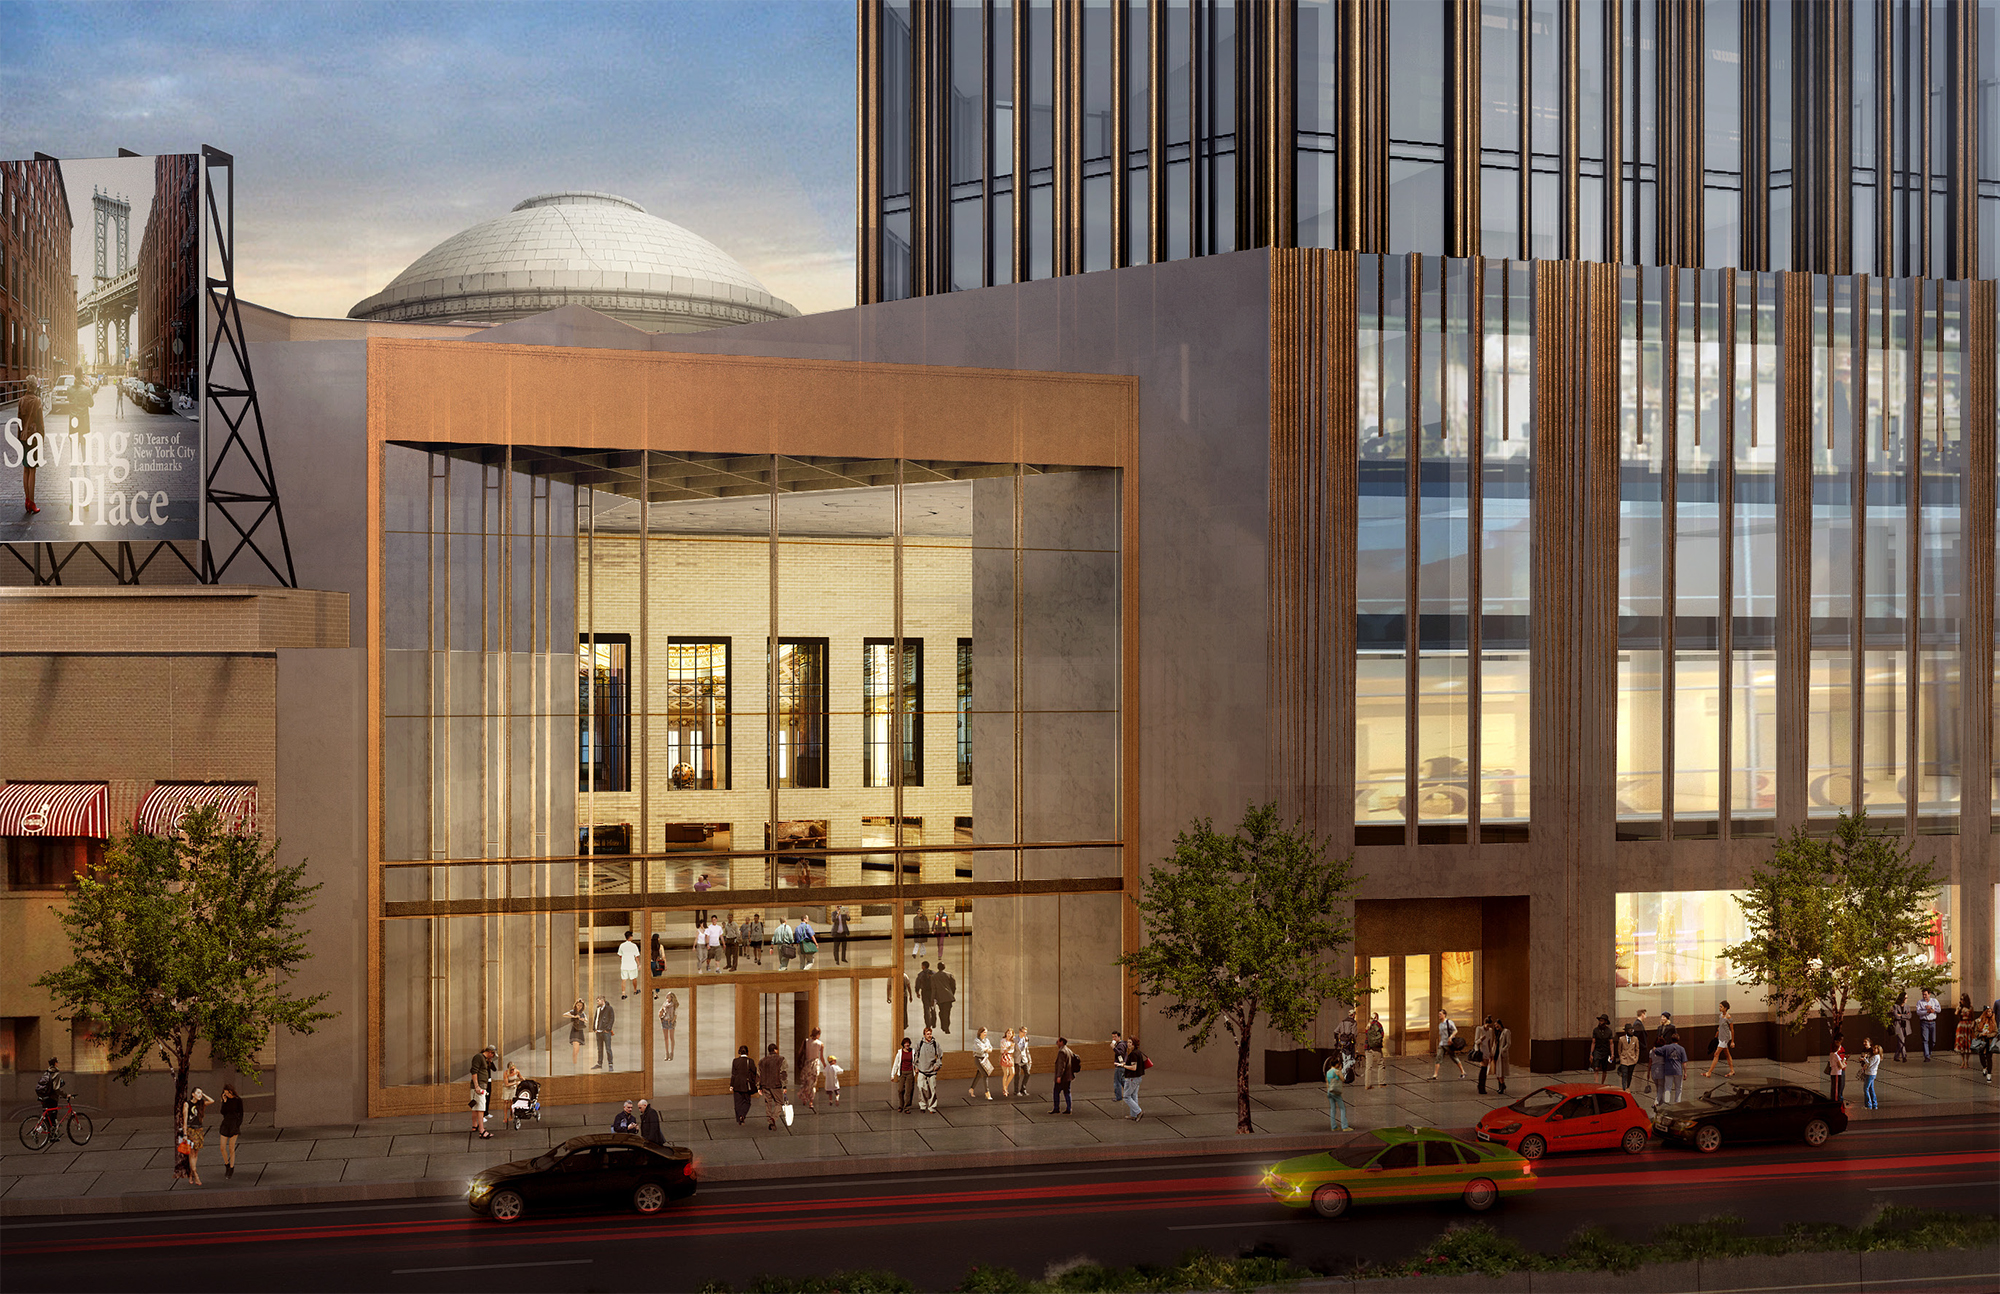 Rendering of 340 Flatbush Avenue Extension, showing the atrium that would connect to the banking hall at 9 DeKalb Avenue. Credit: SHoP